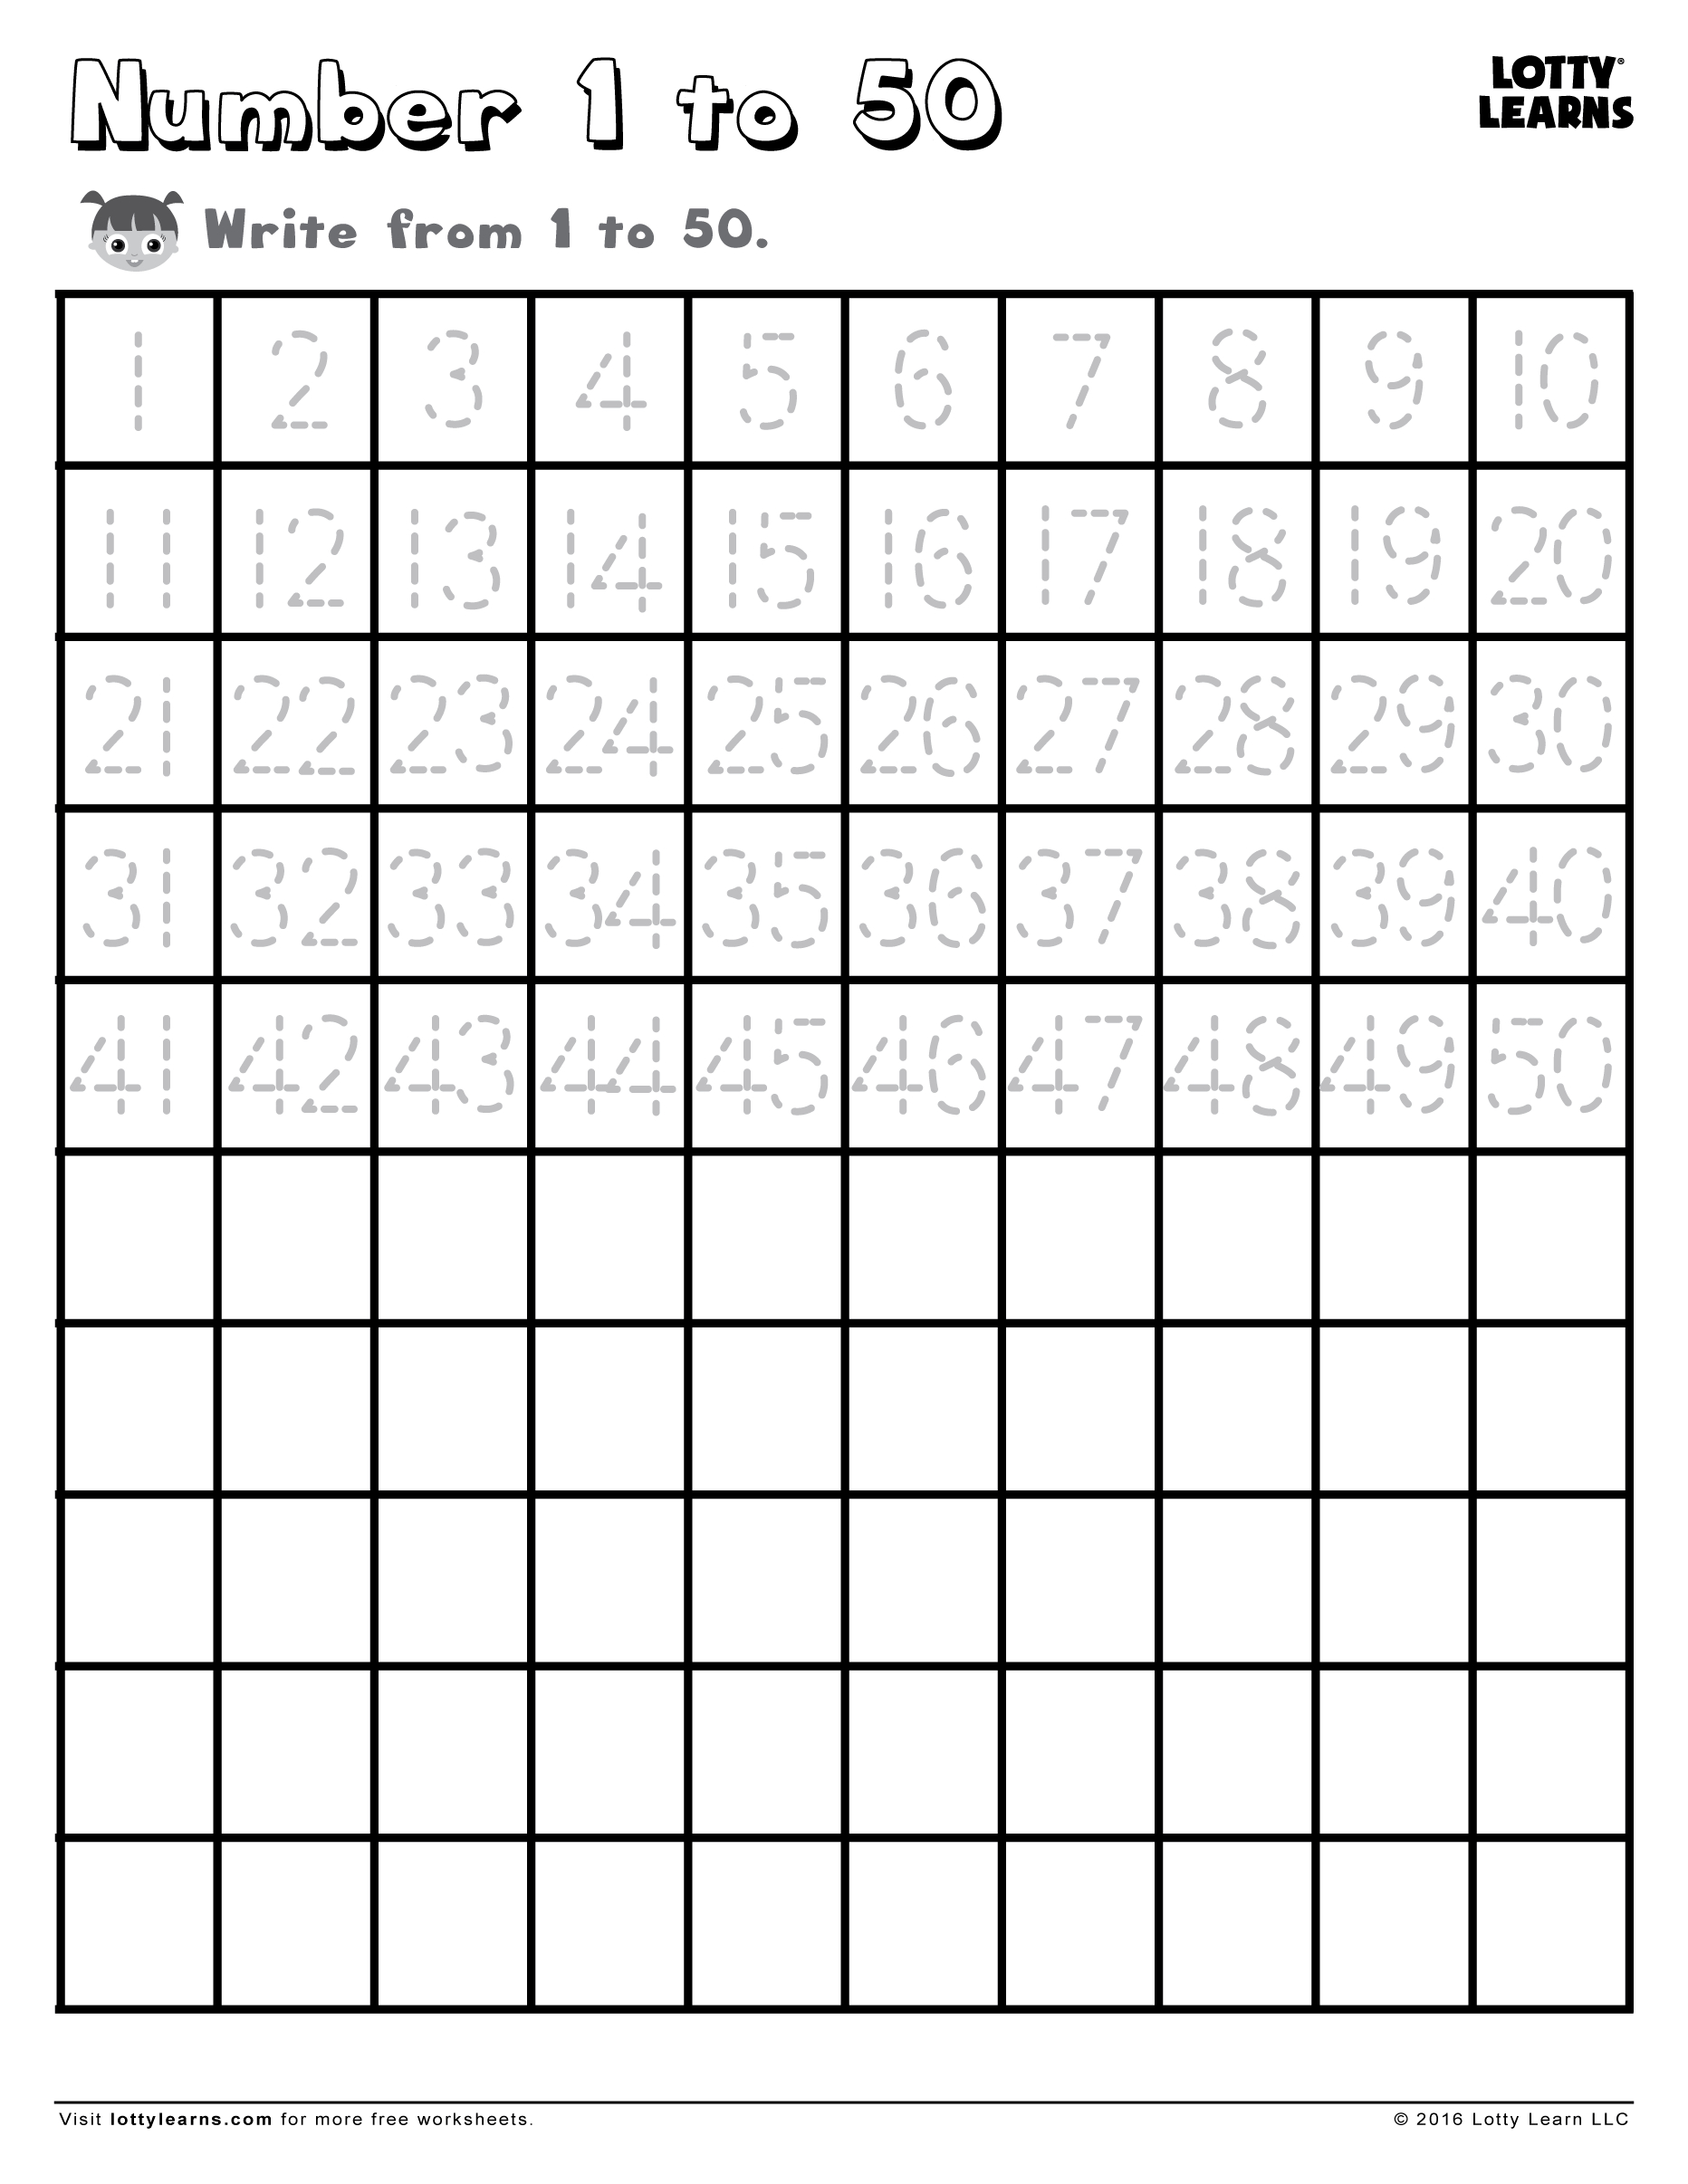 Free Number Writing Practice Worksheets On Lottylearns! Learn To - Free Printable Tracing Numbers 1 50